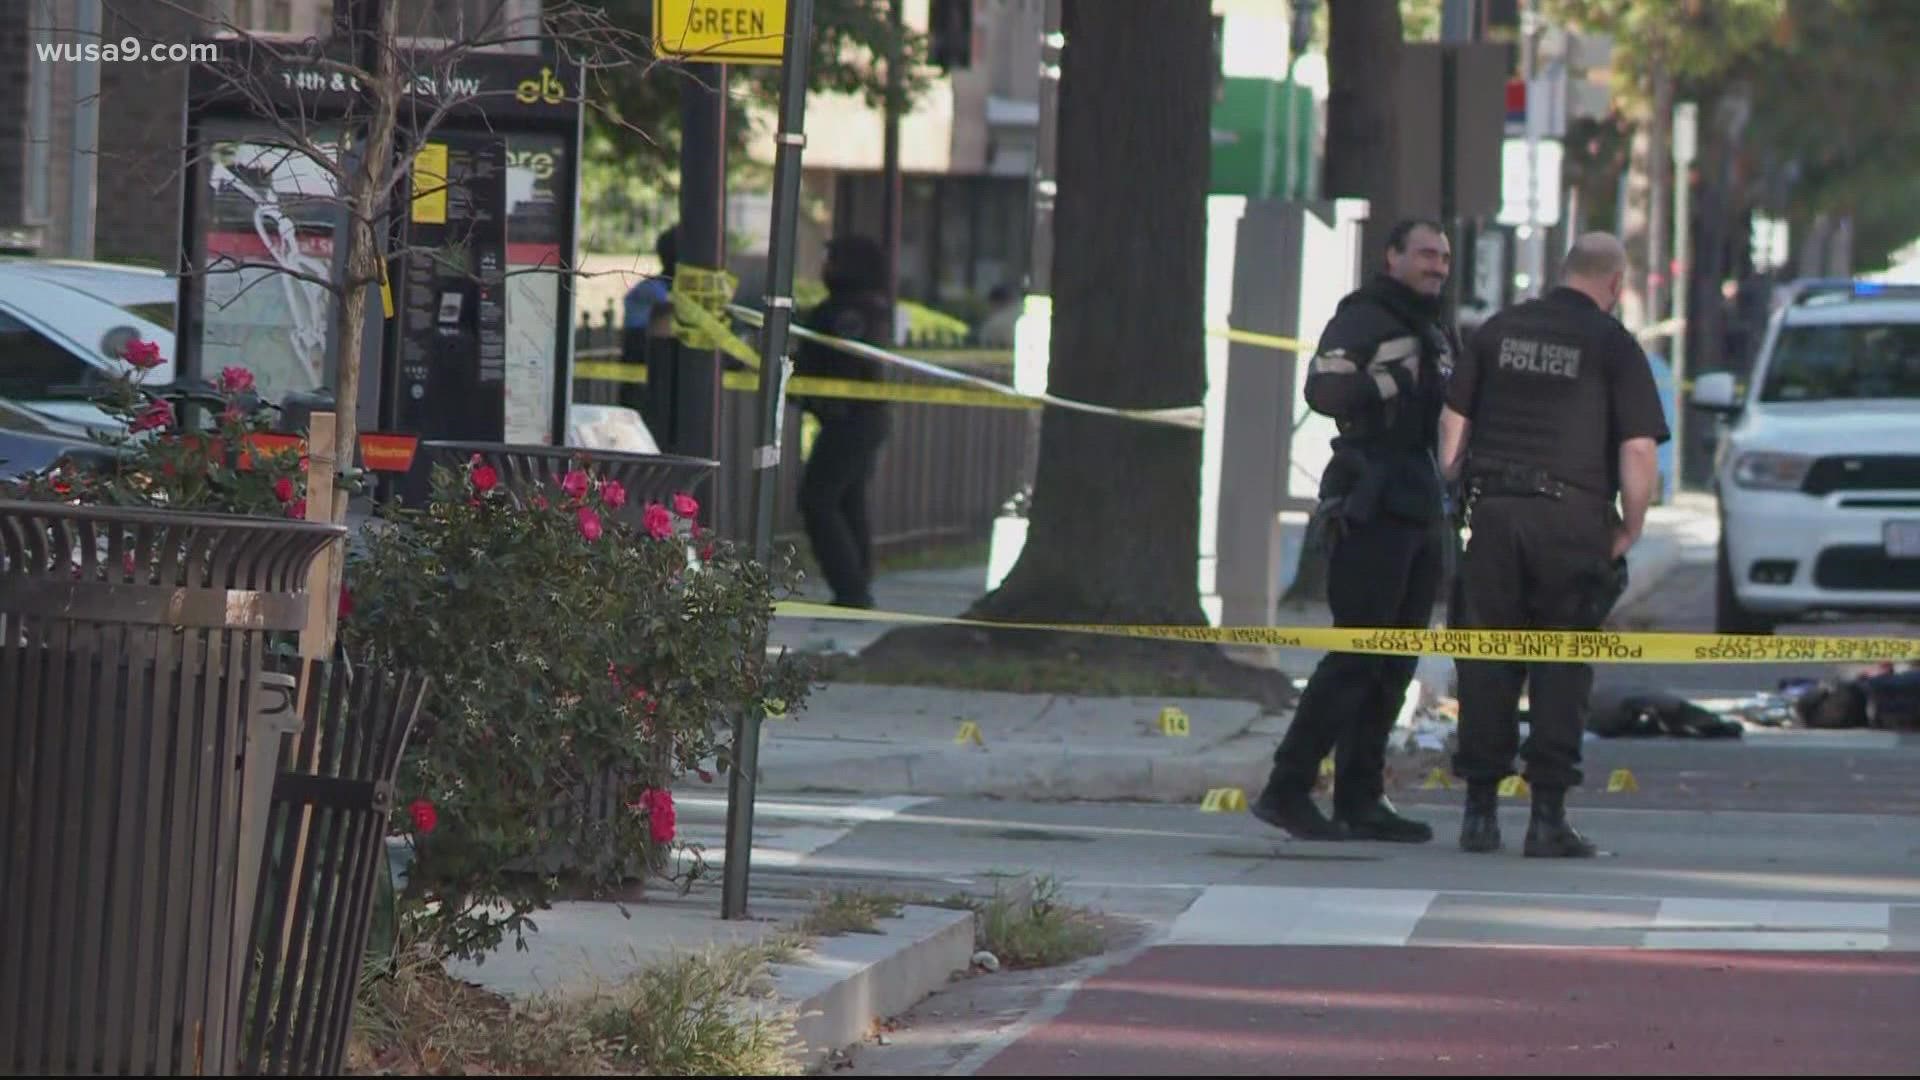 Police are searching for two men they say are linked to a double shooting that happened in Columbia Heights Wednesday afternoon. One man is dead.